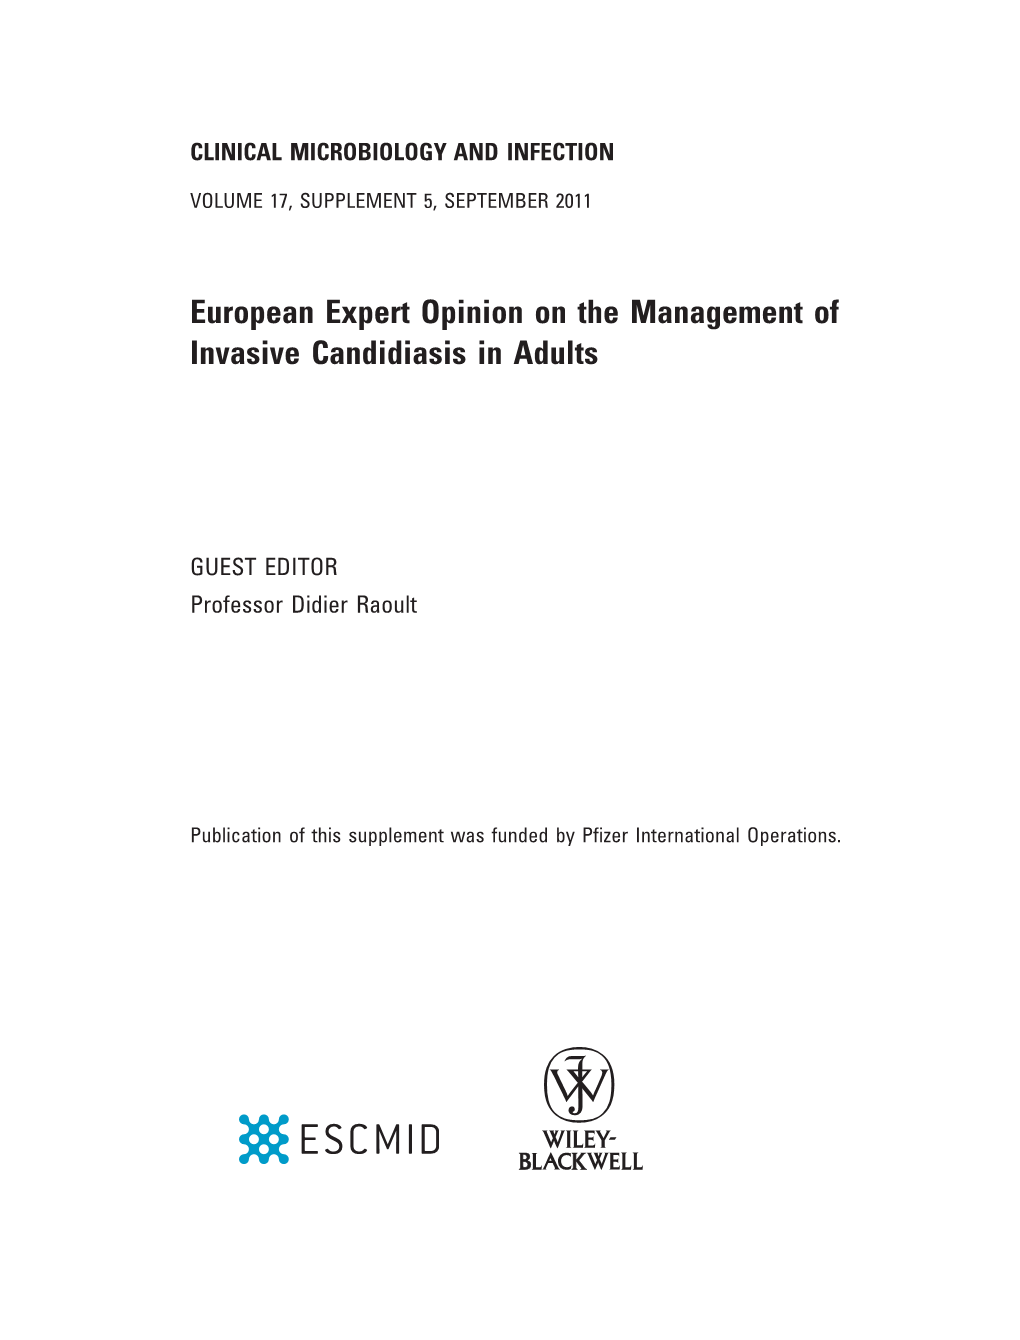 European Expert Opinion on the Management of Invasive Candidiasis in Adults